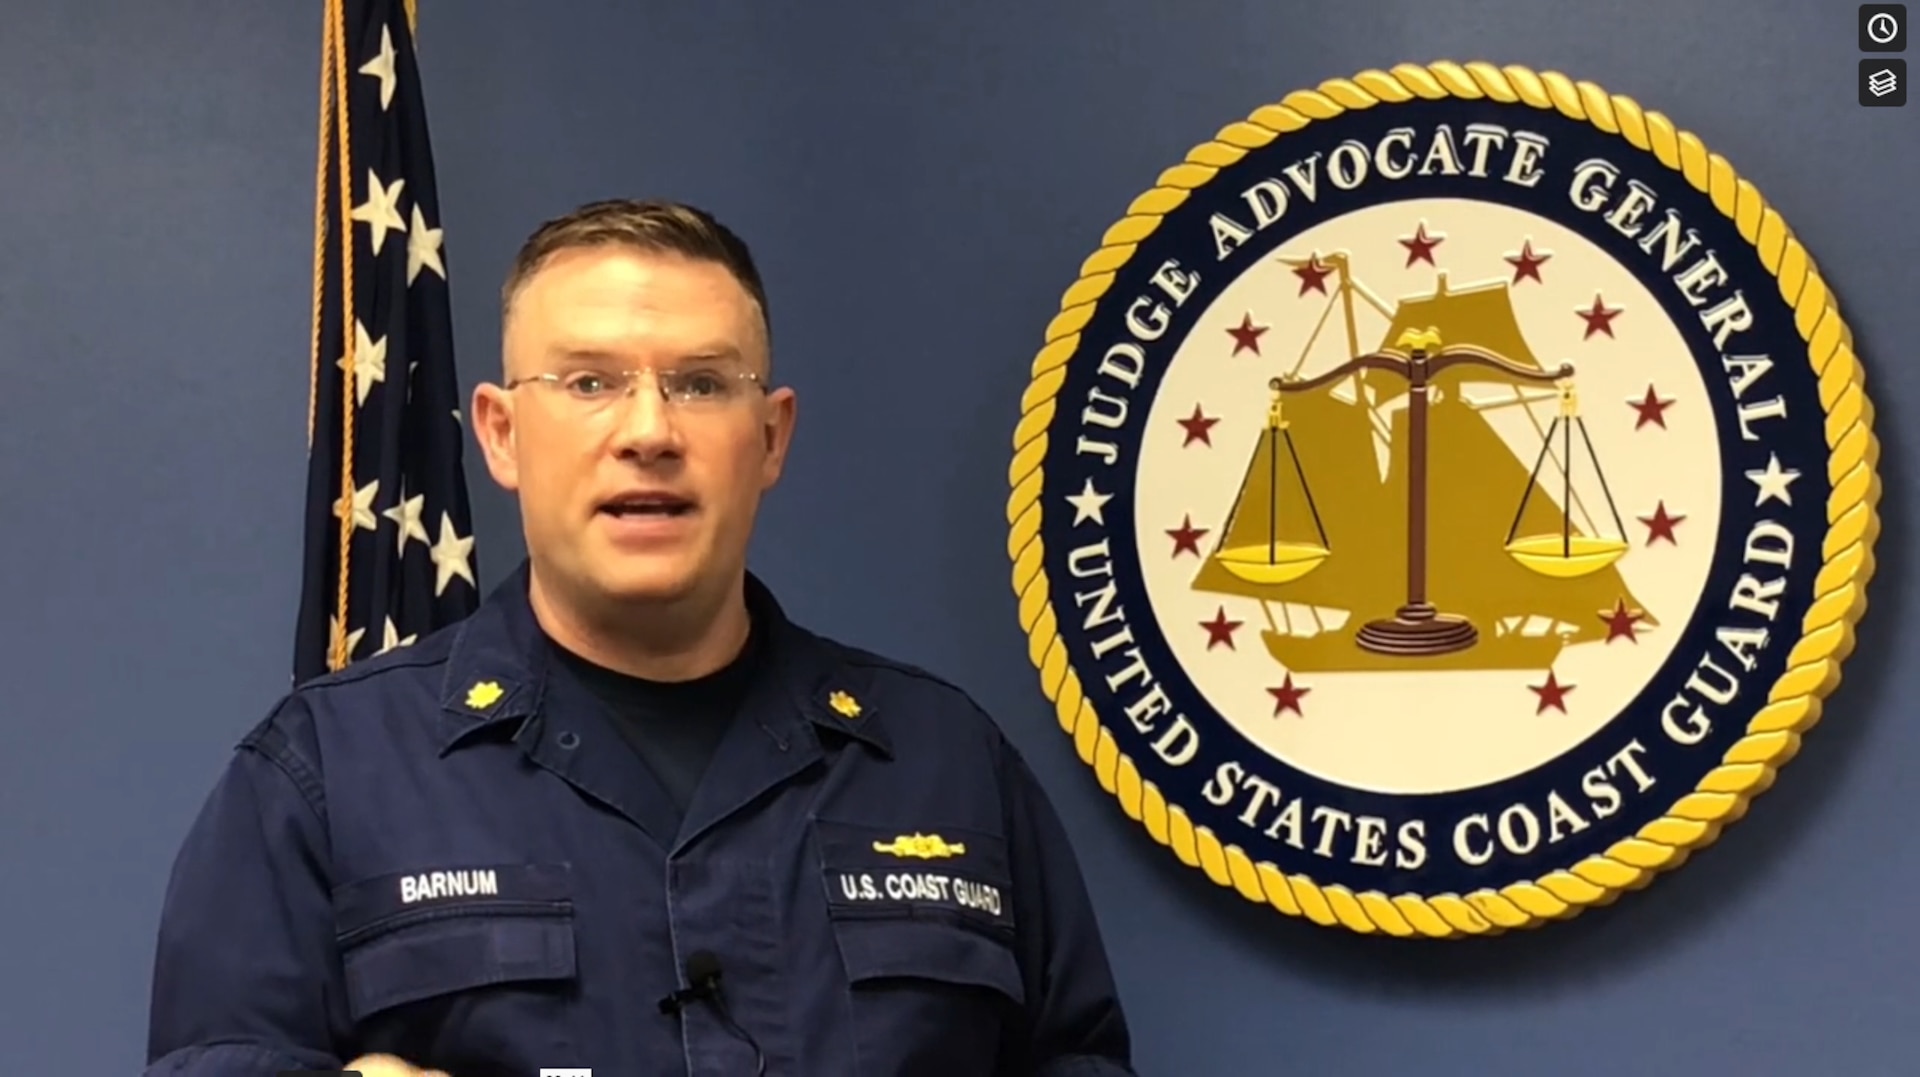 Cmdr. Jeff Barnum discusses “How to Vote while at “A” school” in a video presentation. U.S. Coast Guard video.